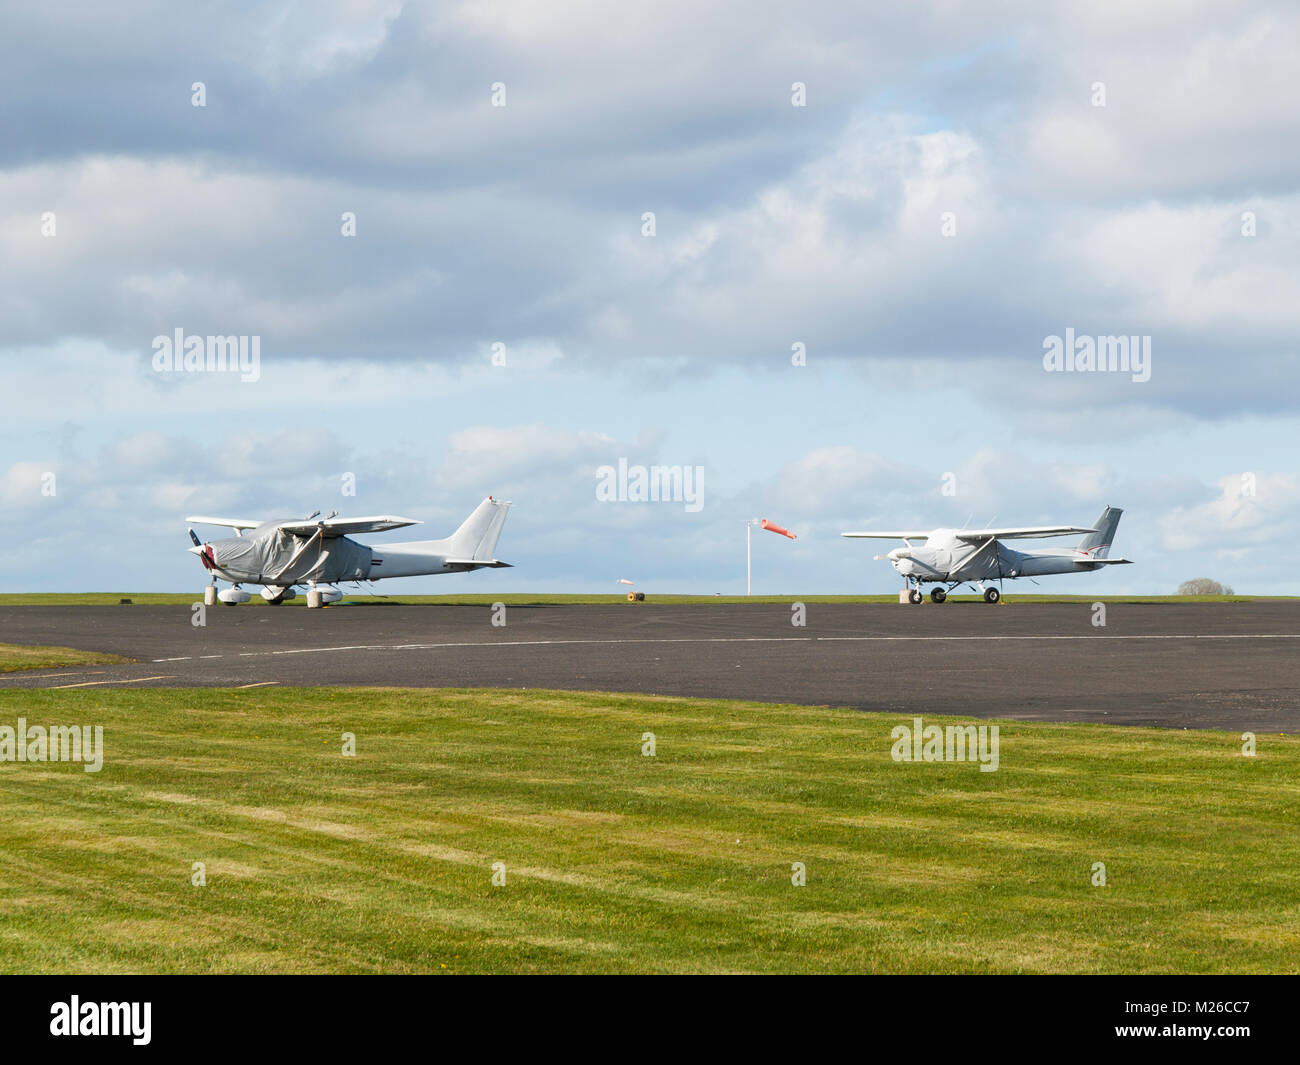 Small sport single-engine planes parked on runway Stock Photo